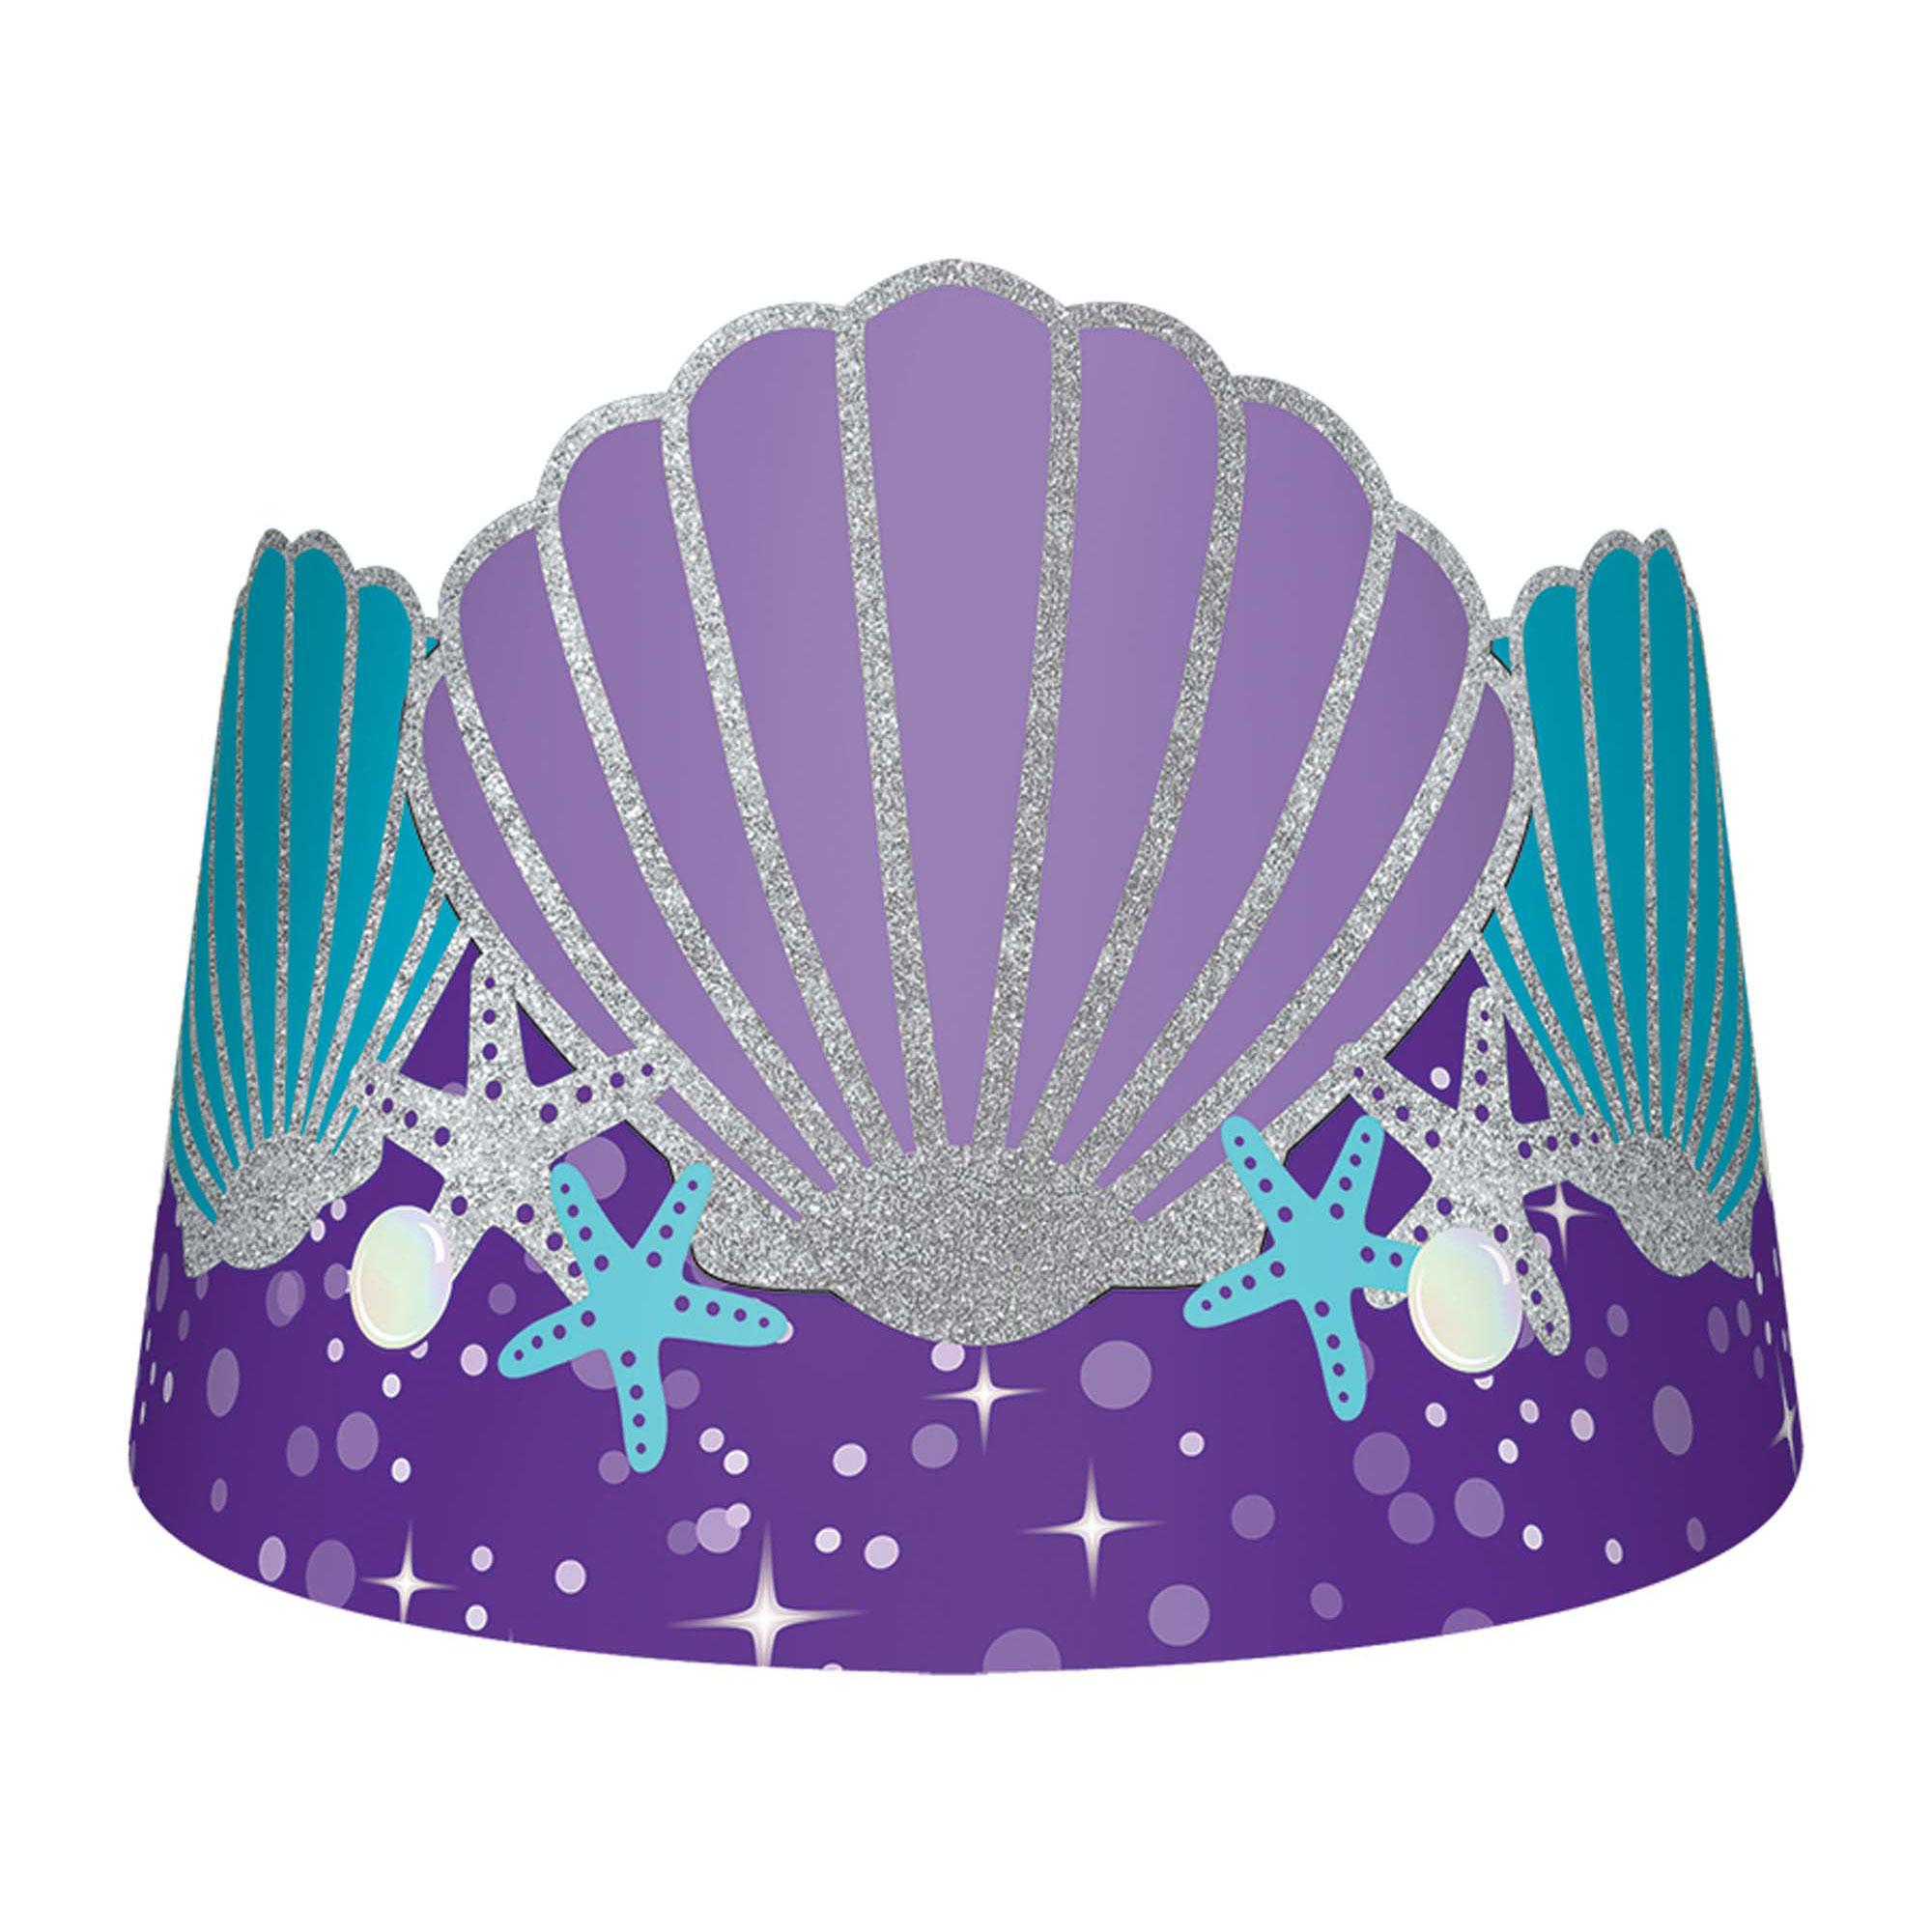 Mermaid Wishes Paper Crowns 8pcs Costumes & Apparel - Party Centre